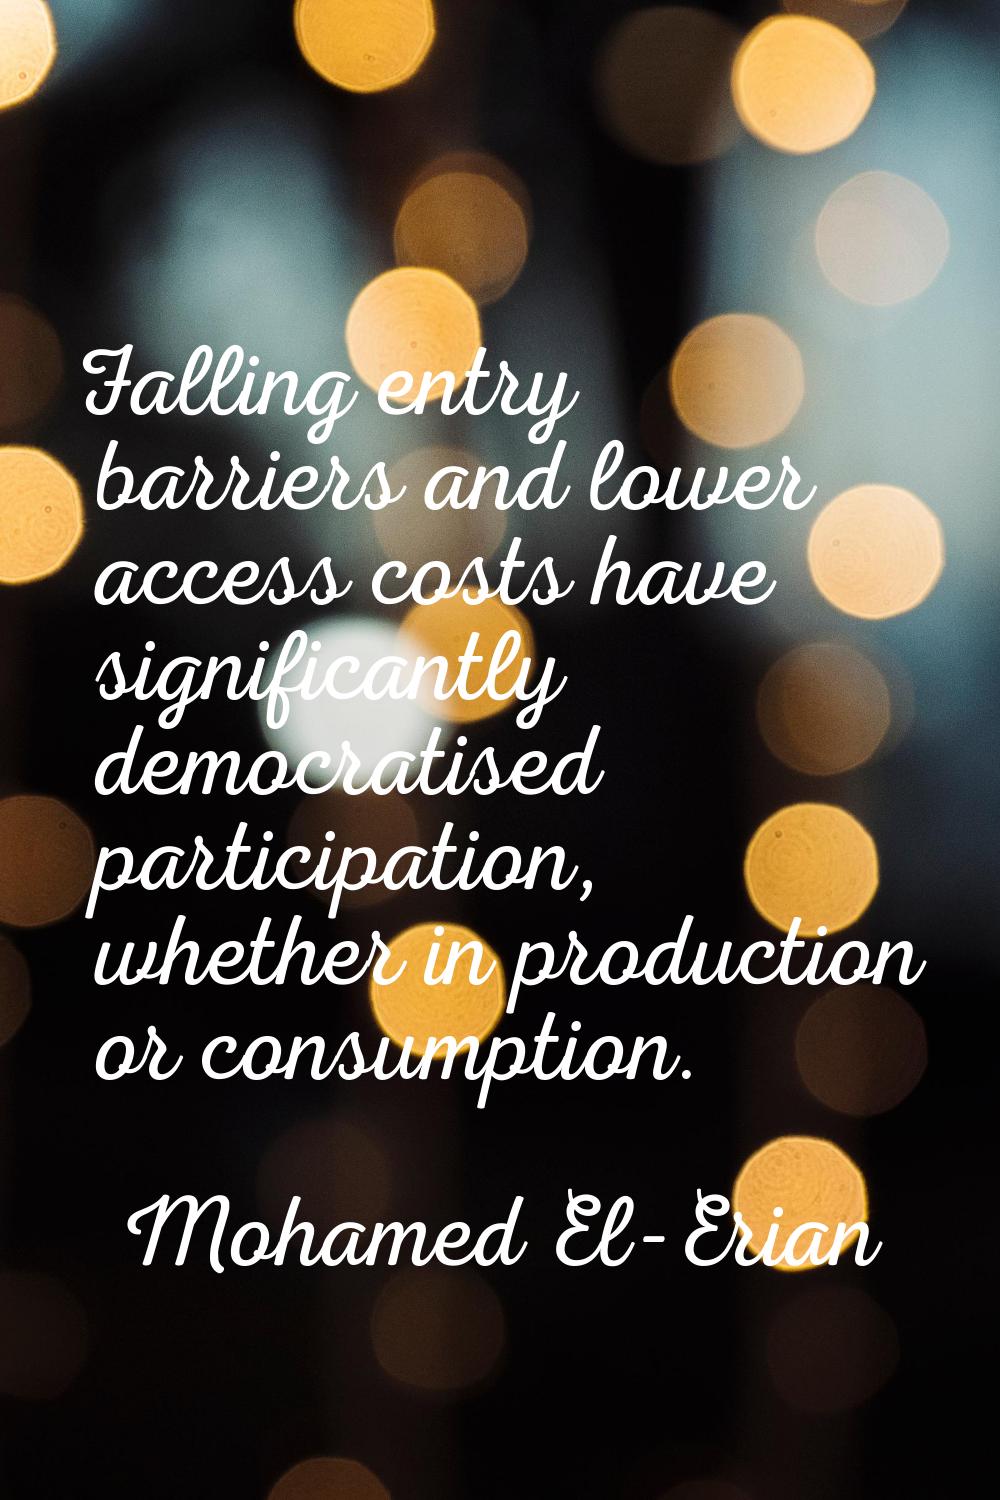 Falling entry barriers and lower access costs have significantly democratised participation, whethe